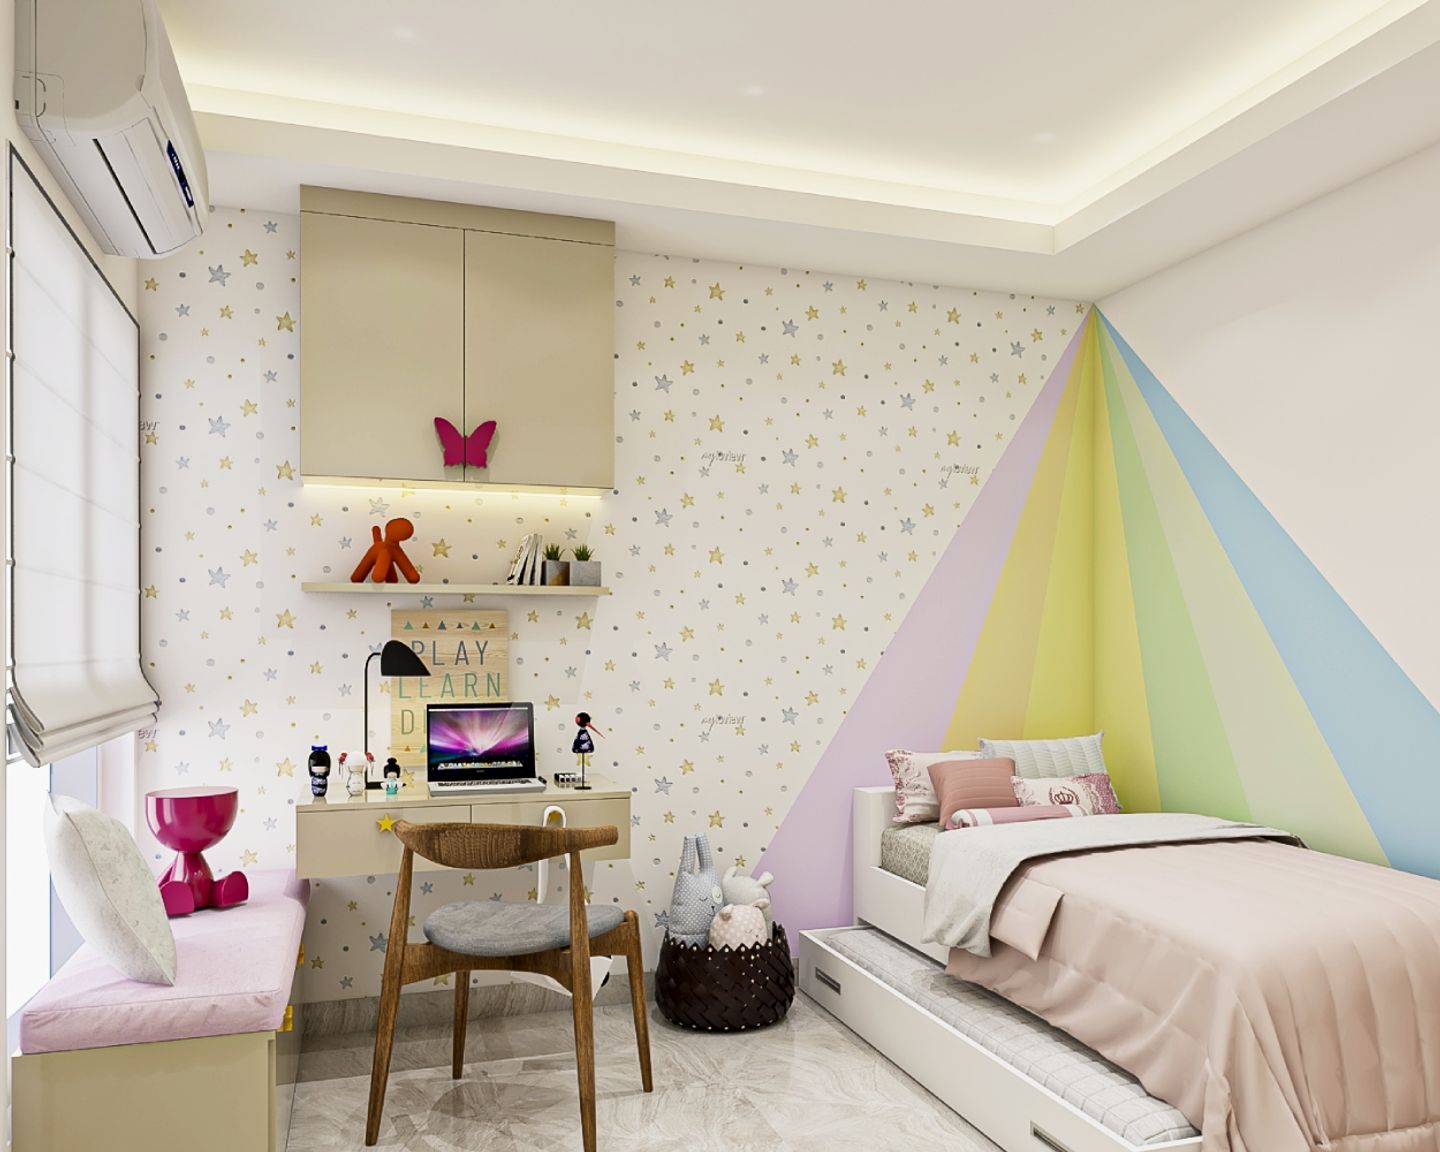 Kids' Room Design With A Single Bed With Storage - Livspace